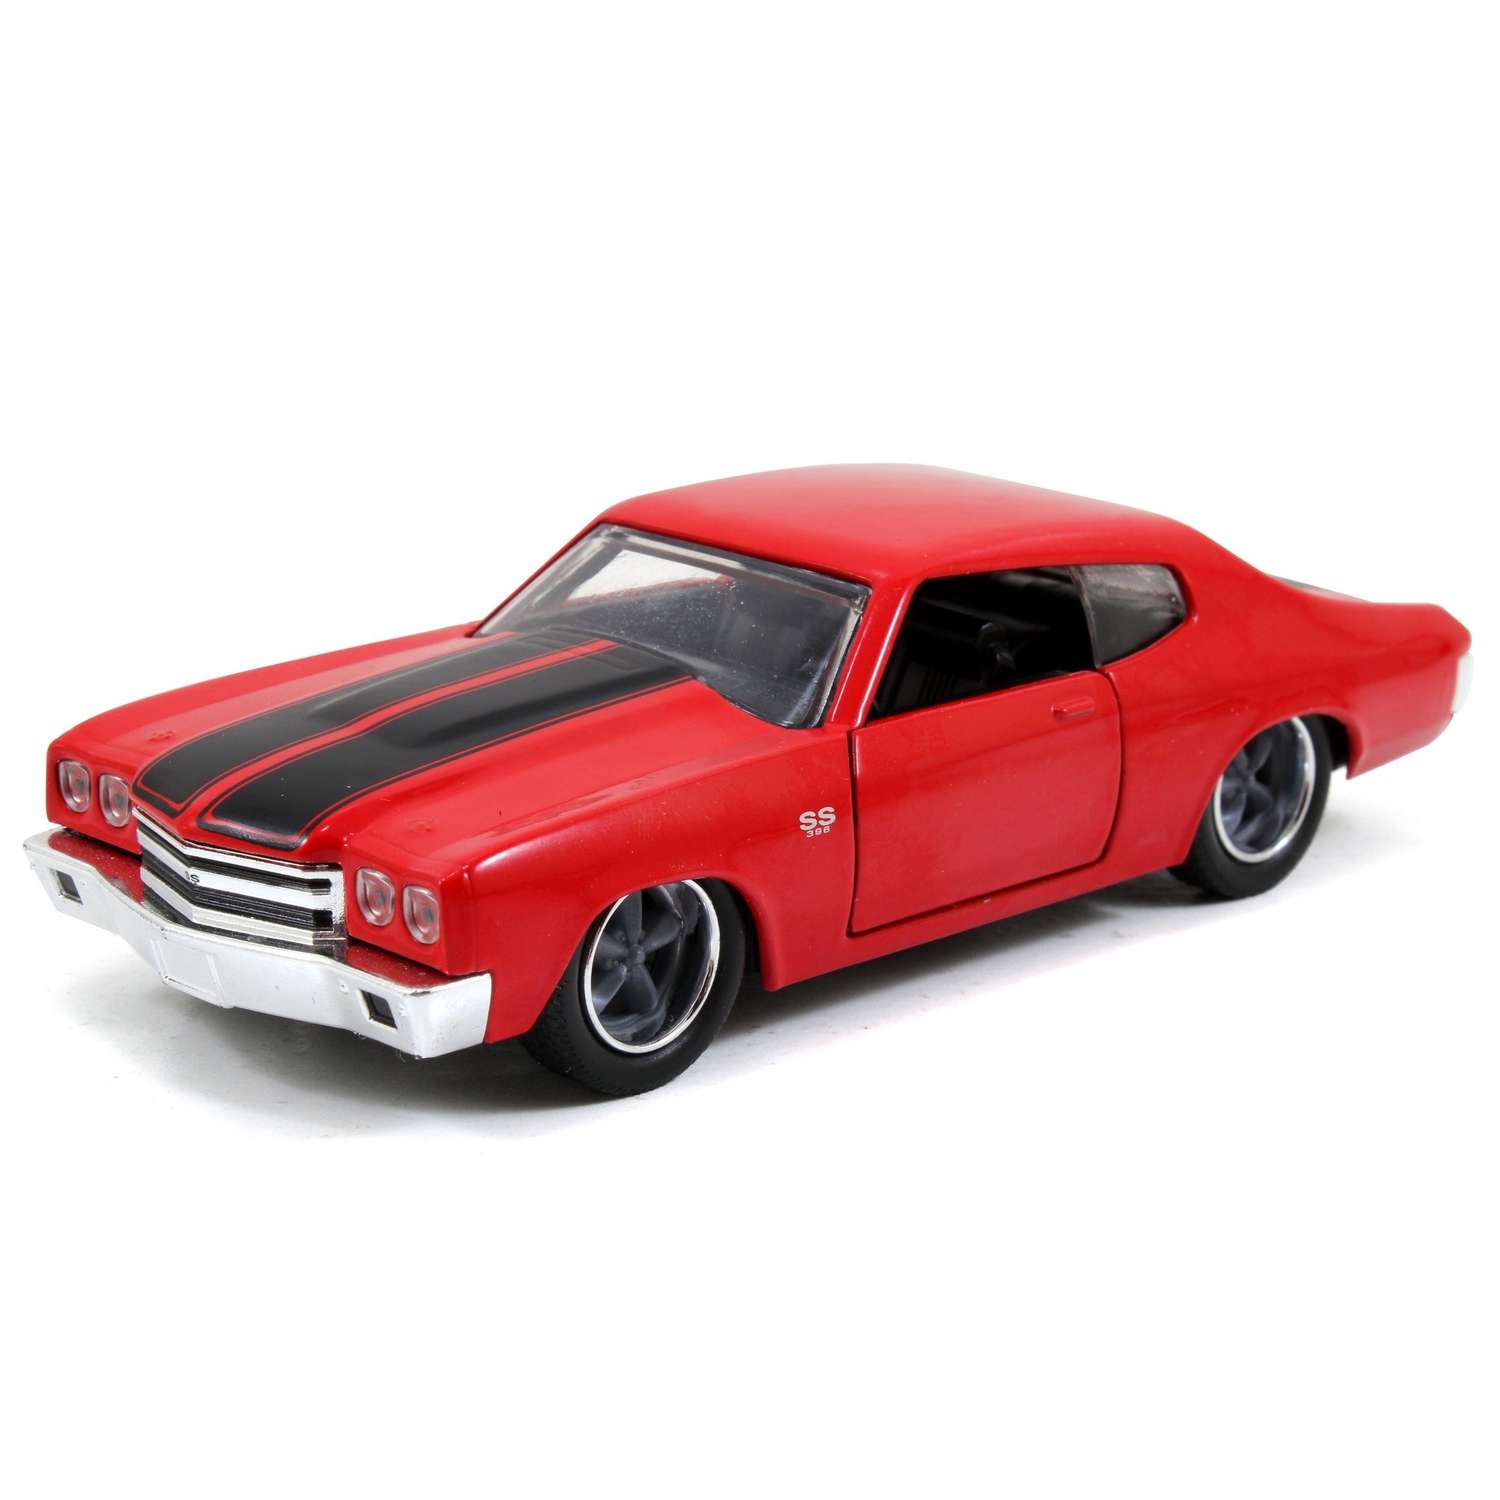 Машинка Fast and Furious Die-cast 1970 Chevy Chevelle SS 1:32 металл 24037 - фото 1